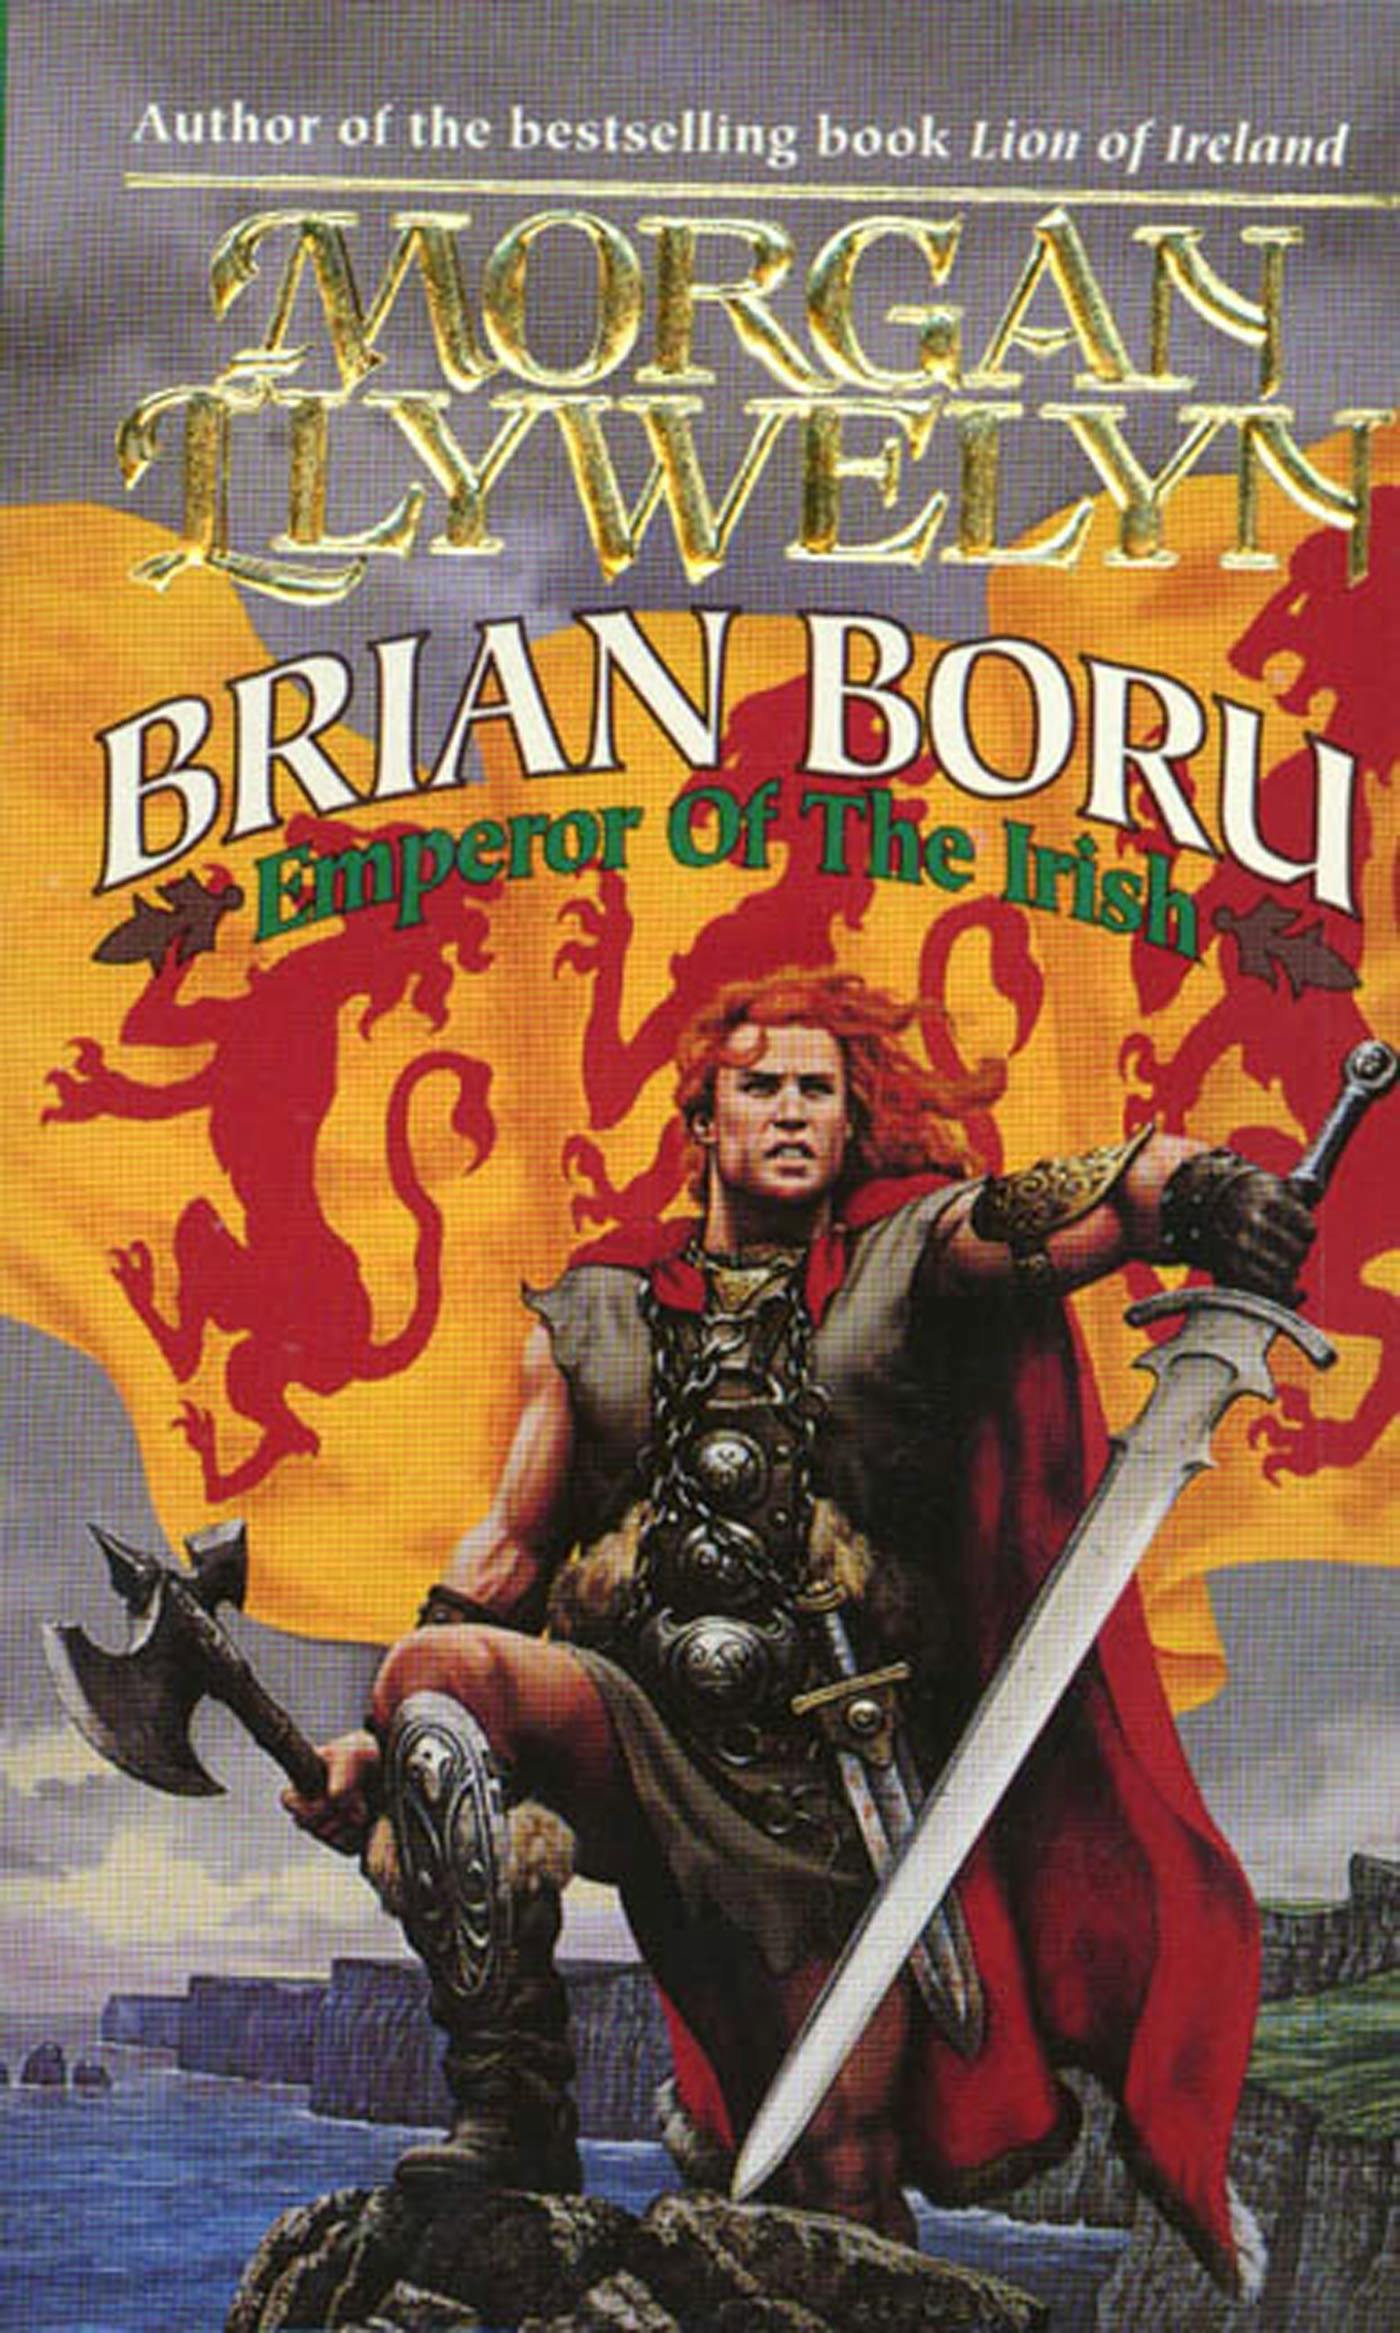 Cover for the book titled as: Brian Boru